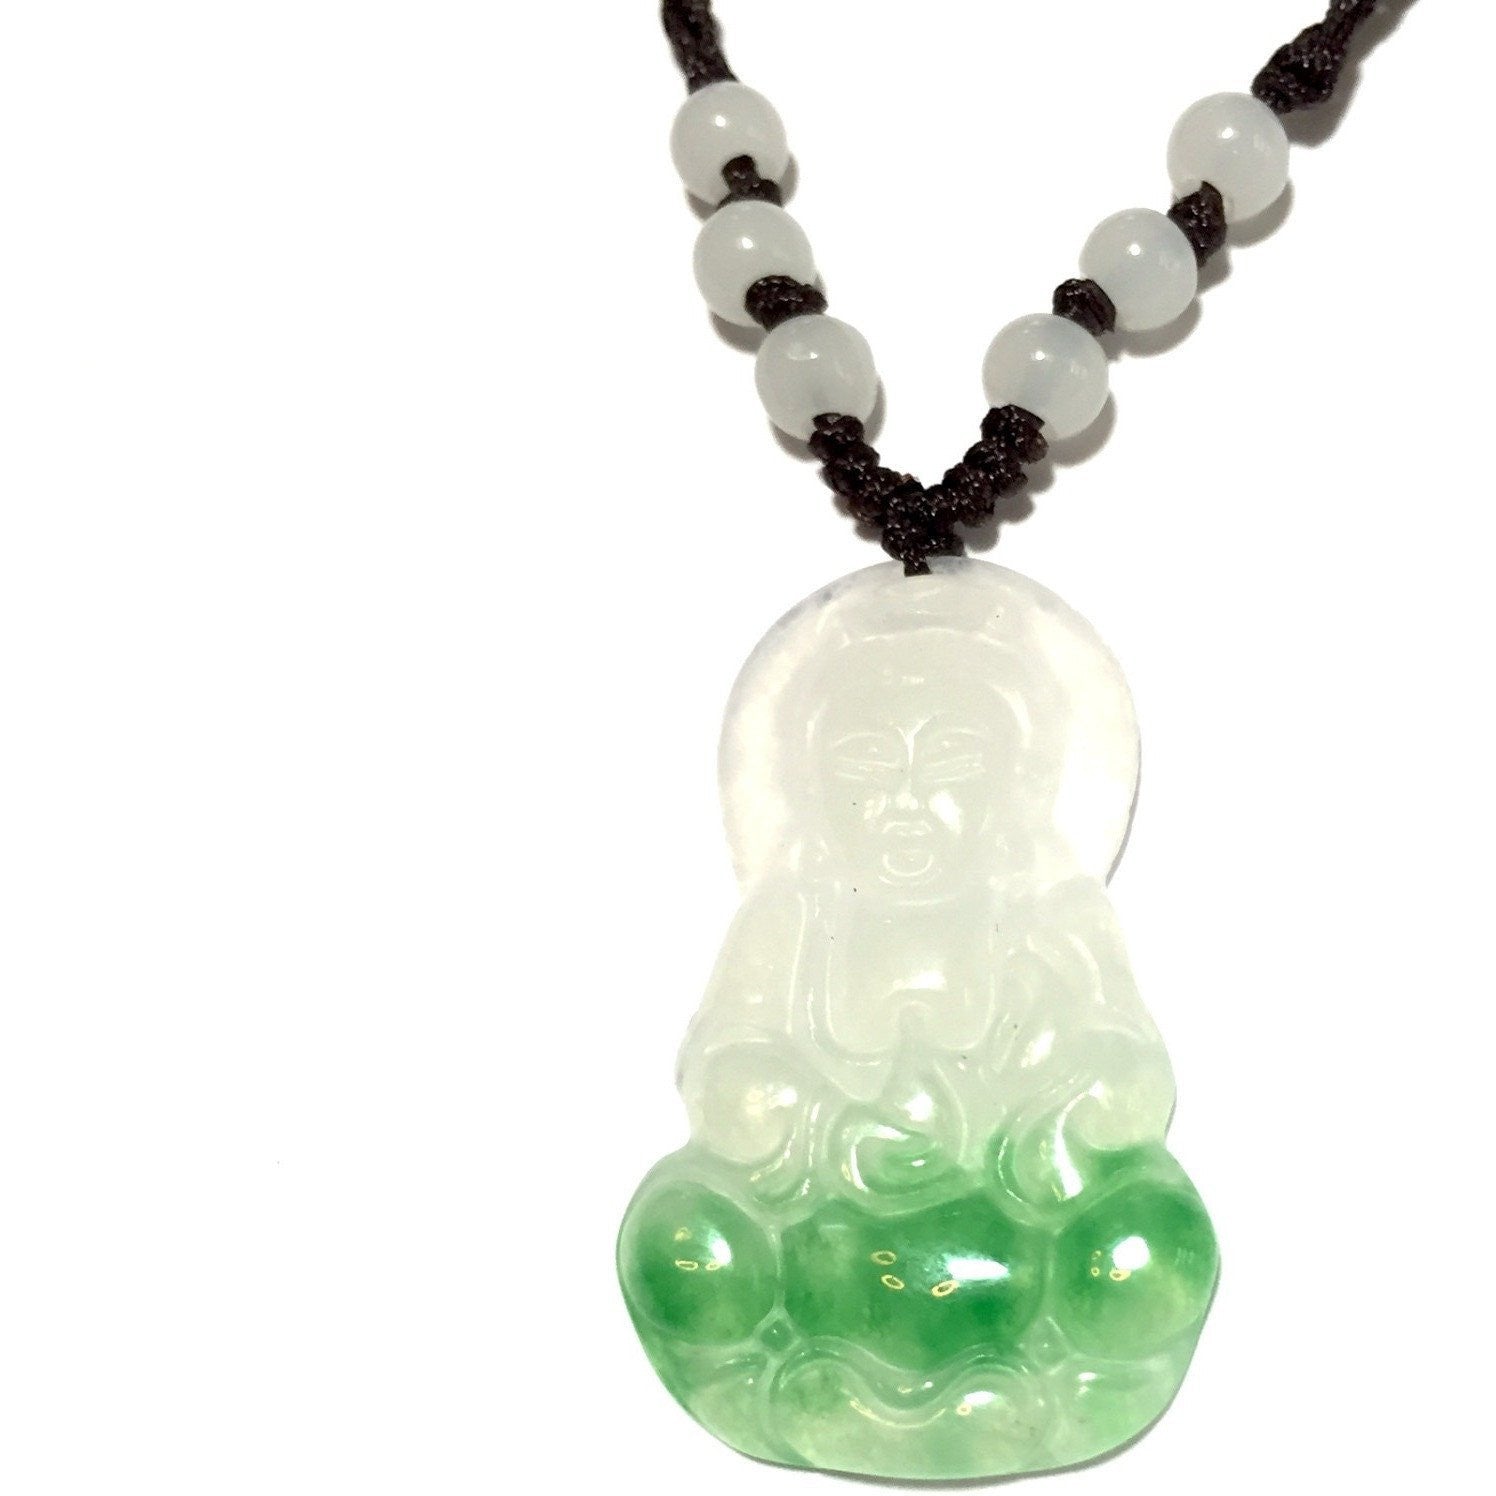 Real Jade Buddha Pendant: The Laughing Buddha Necklace - Mantrapiece